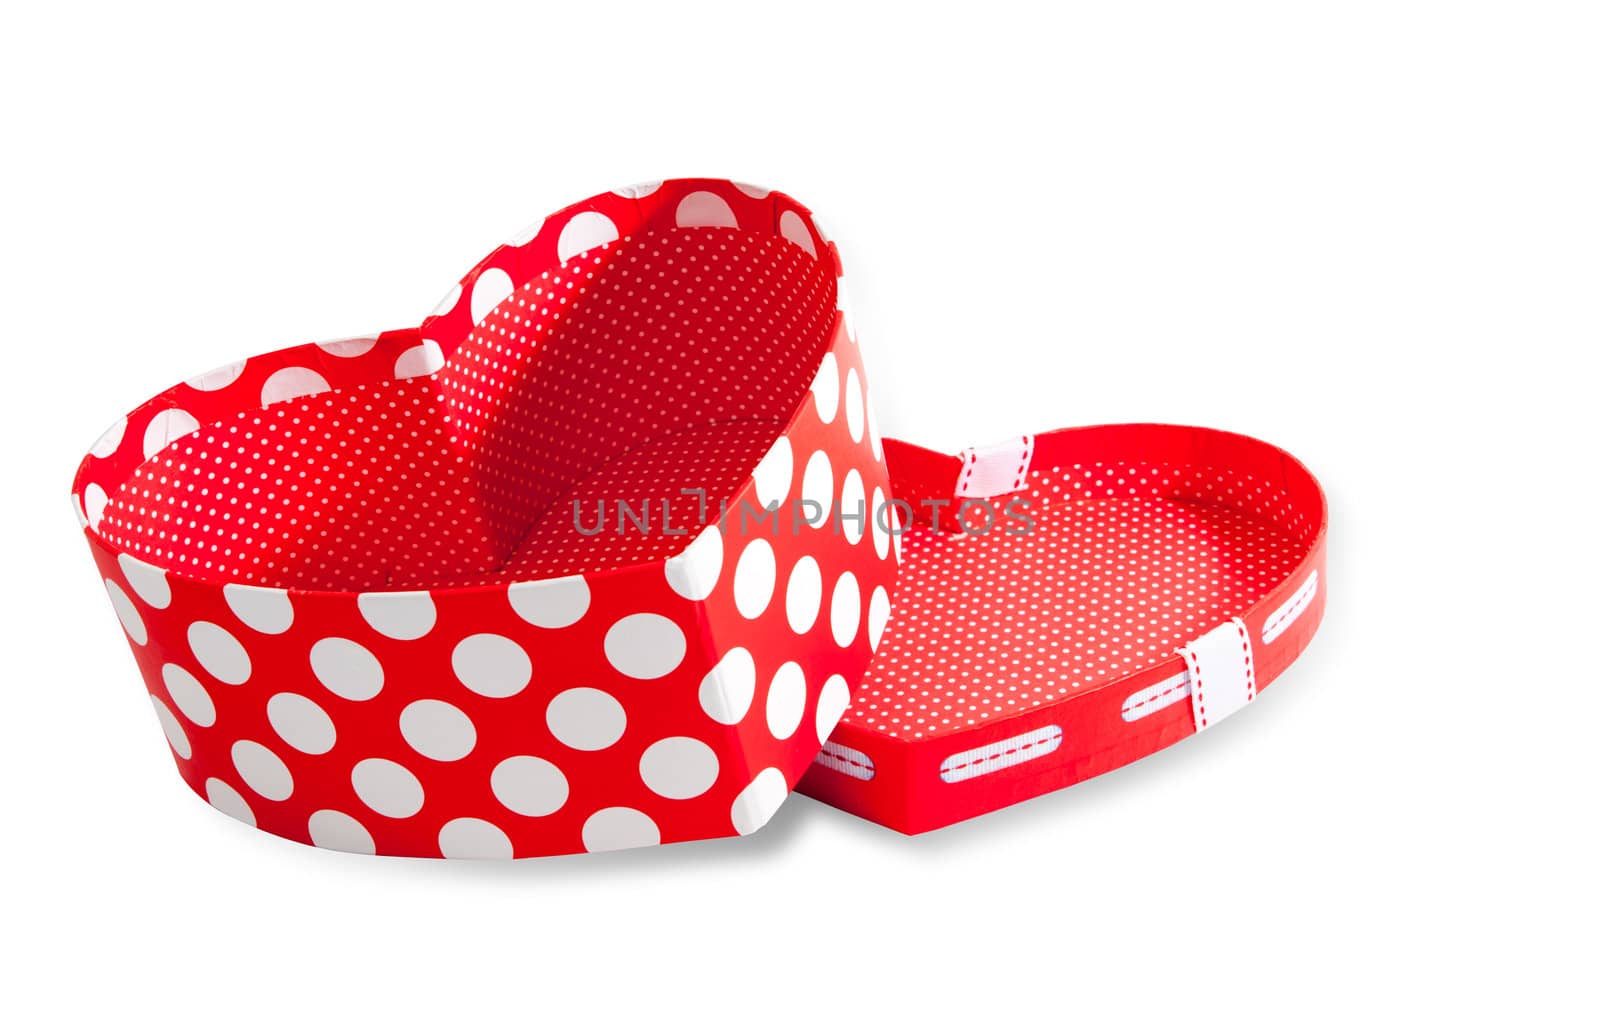 Gift cardboard box in the form of red heart isolated on a white background